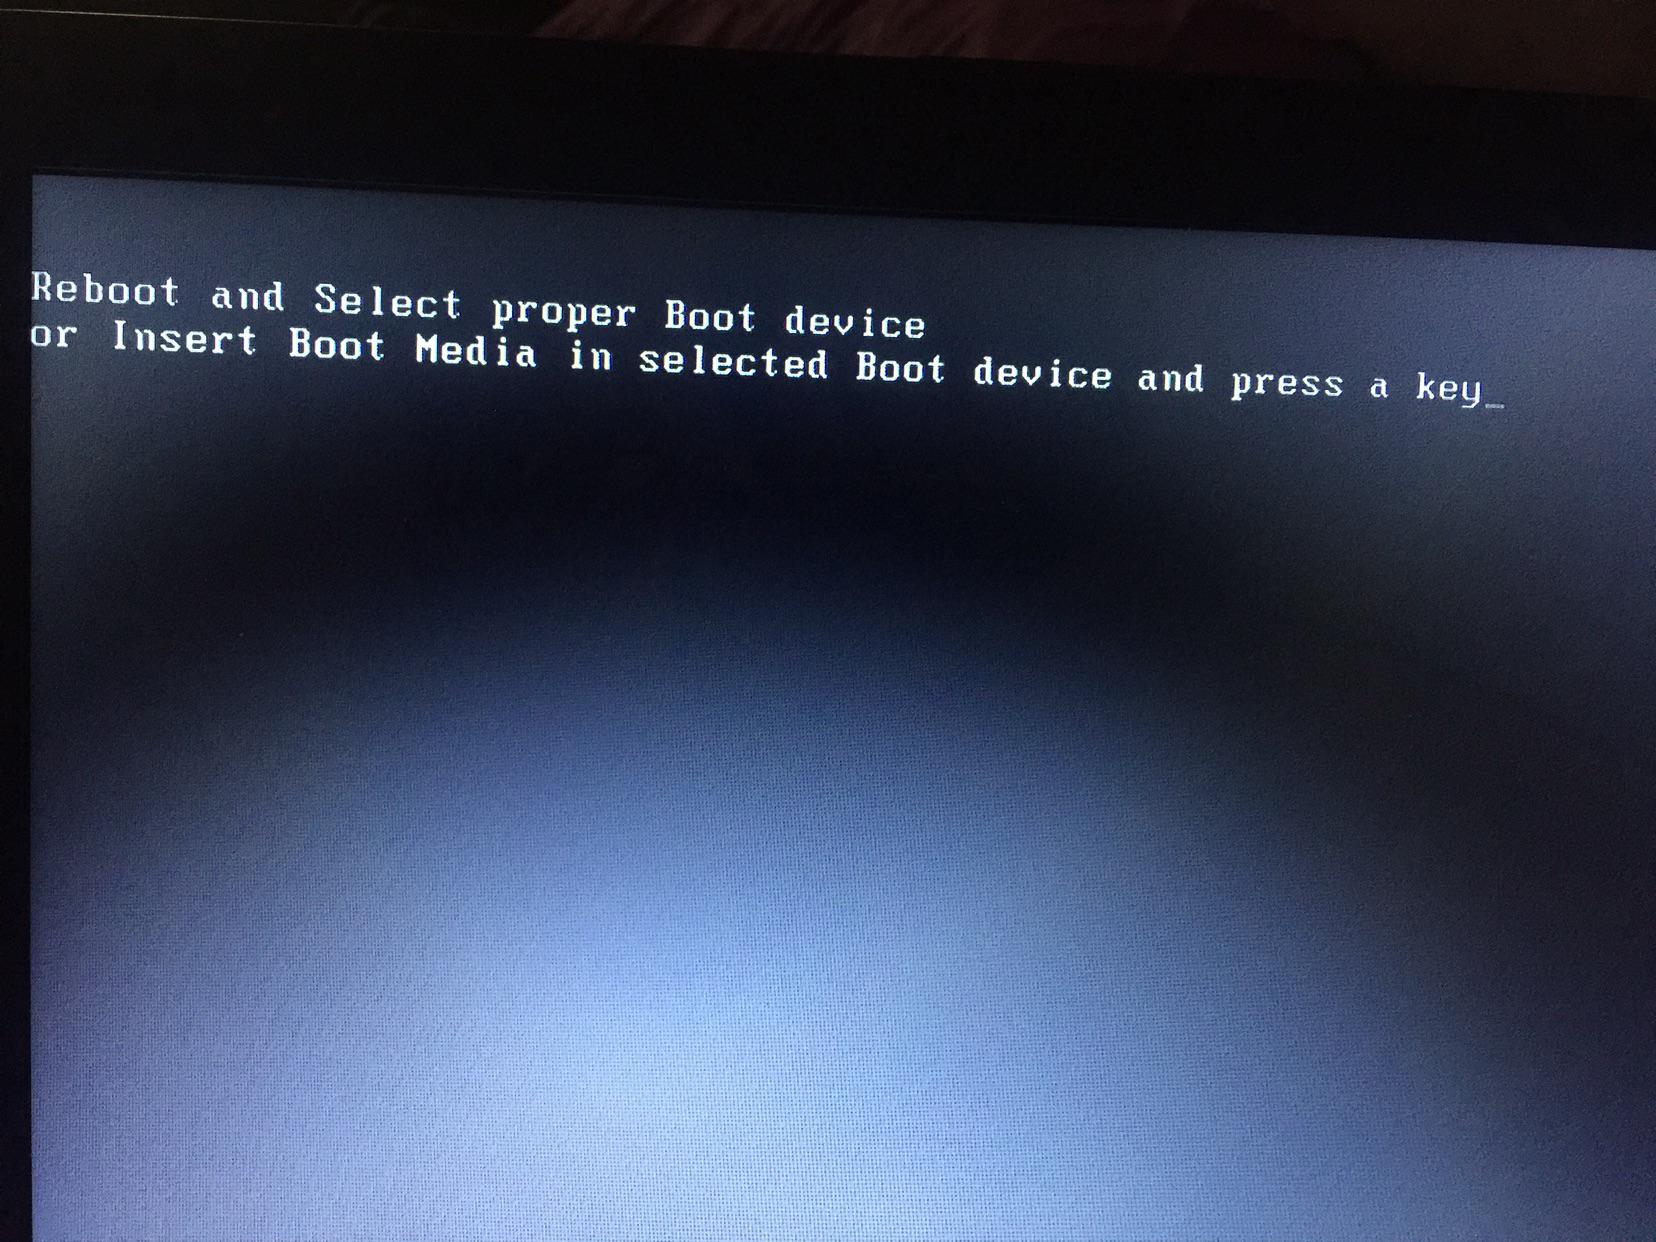 Incorrect BIOS settings: The BIOS settings may be incorrect, causing the computer to try to boot from an incorrect device. Virus or malware: A virus or malware infection can cause damage to the boot files or the hard drive itself, resulting in the "No Boot Device Available" error message.